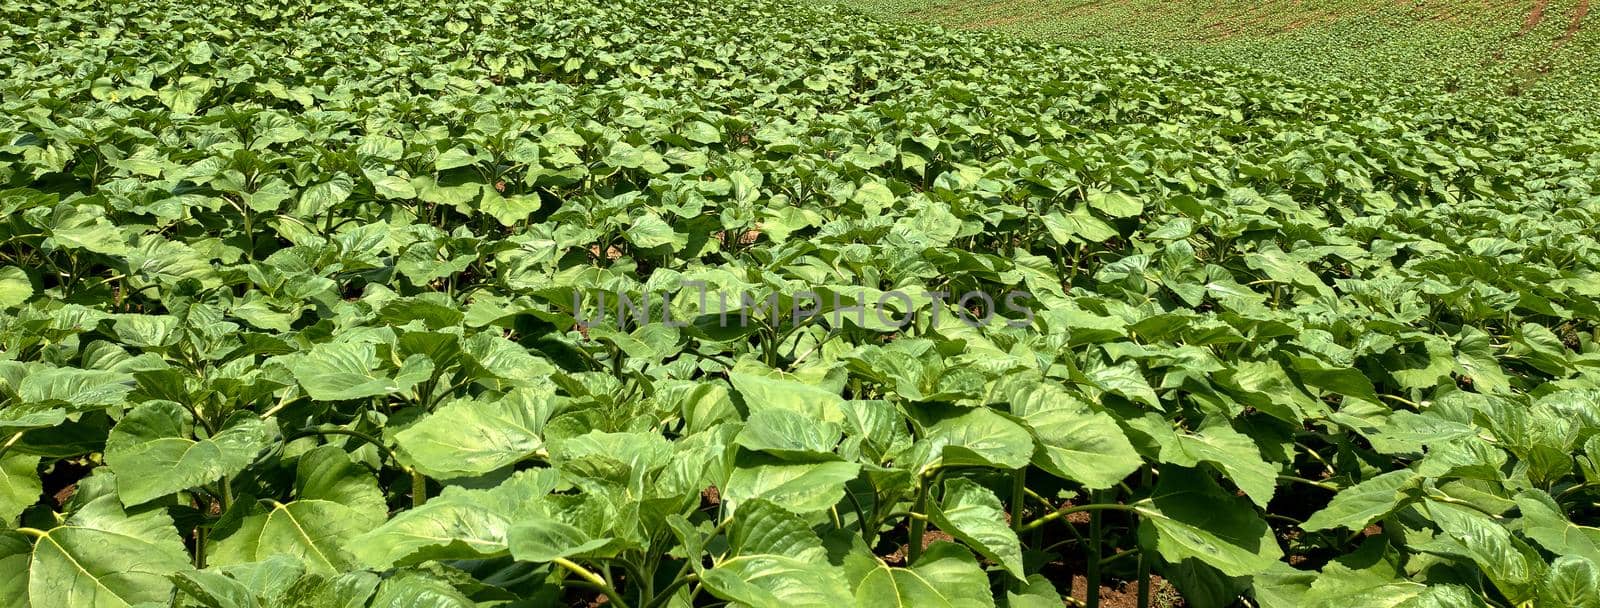 Banner view of green plants. Agriculture concept.